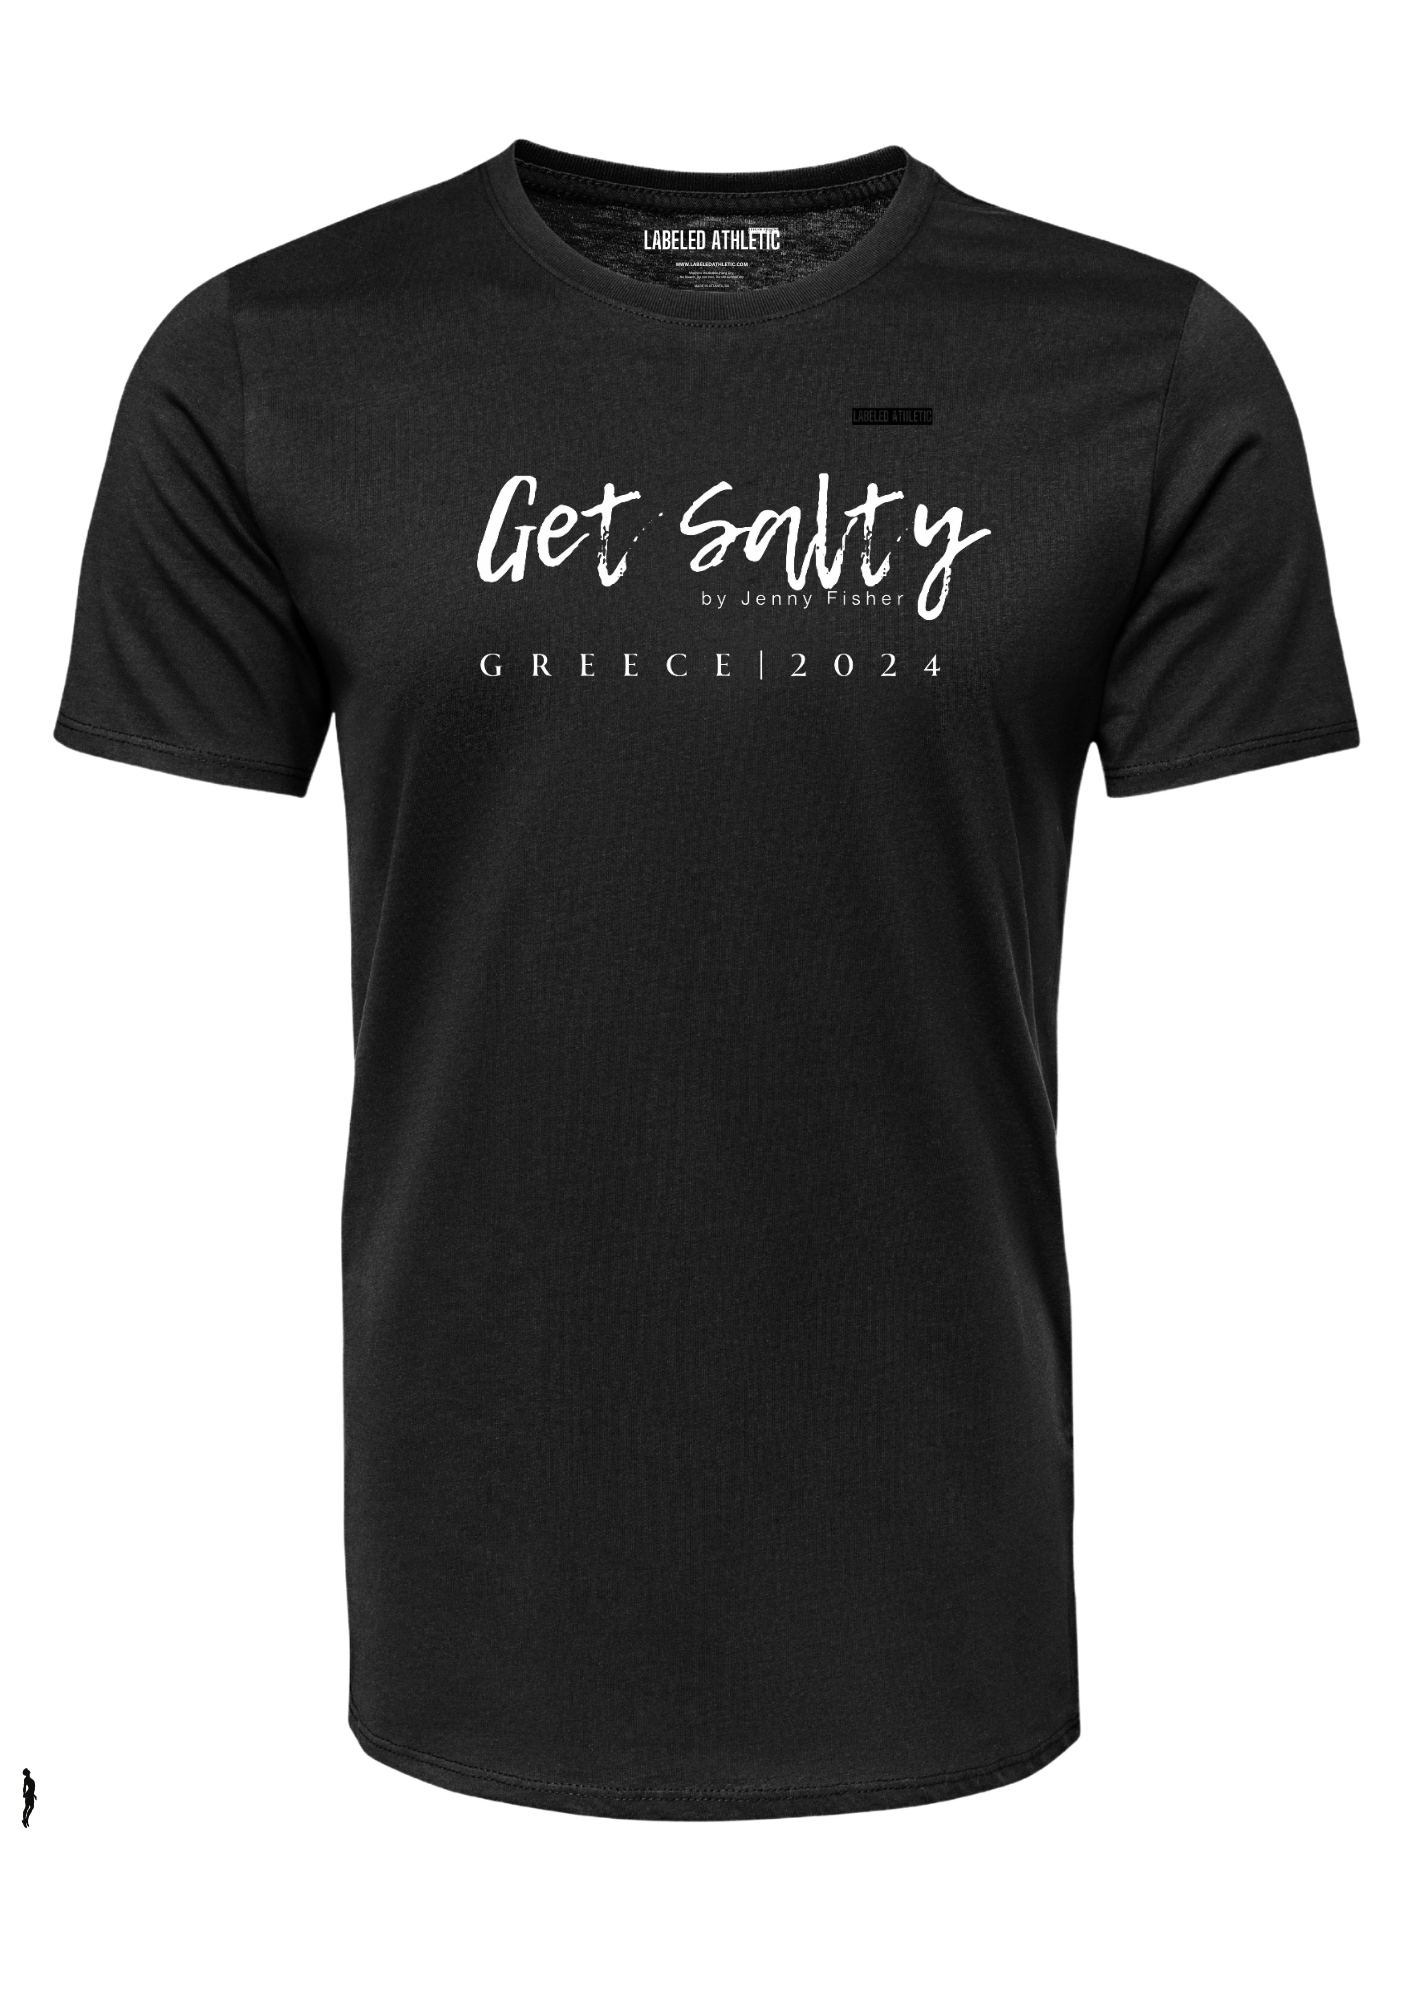 GREECE 2024 | GET SALTY by Jenny Fisher - LABELED ATHLETIC T-SHIRT | BLACK/WHITE/BLACK